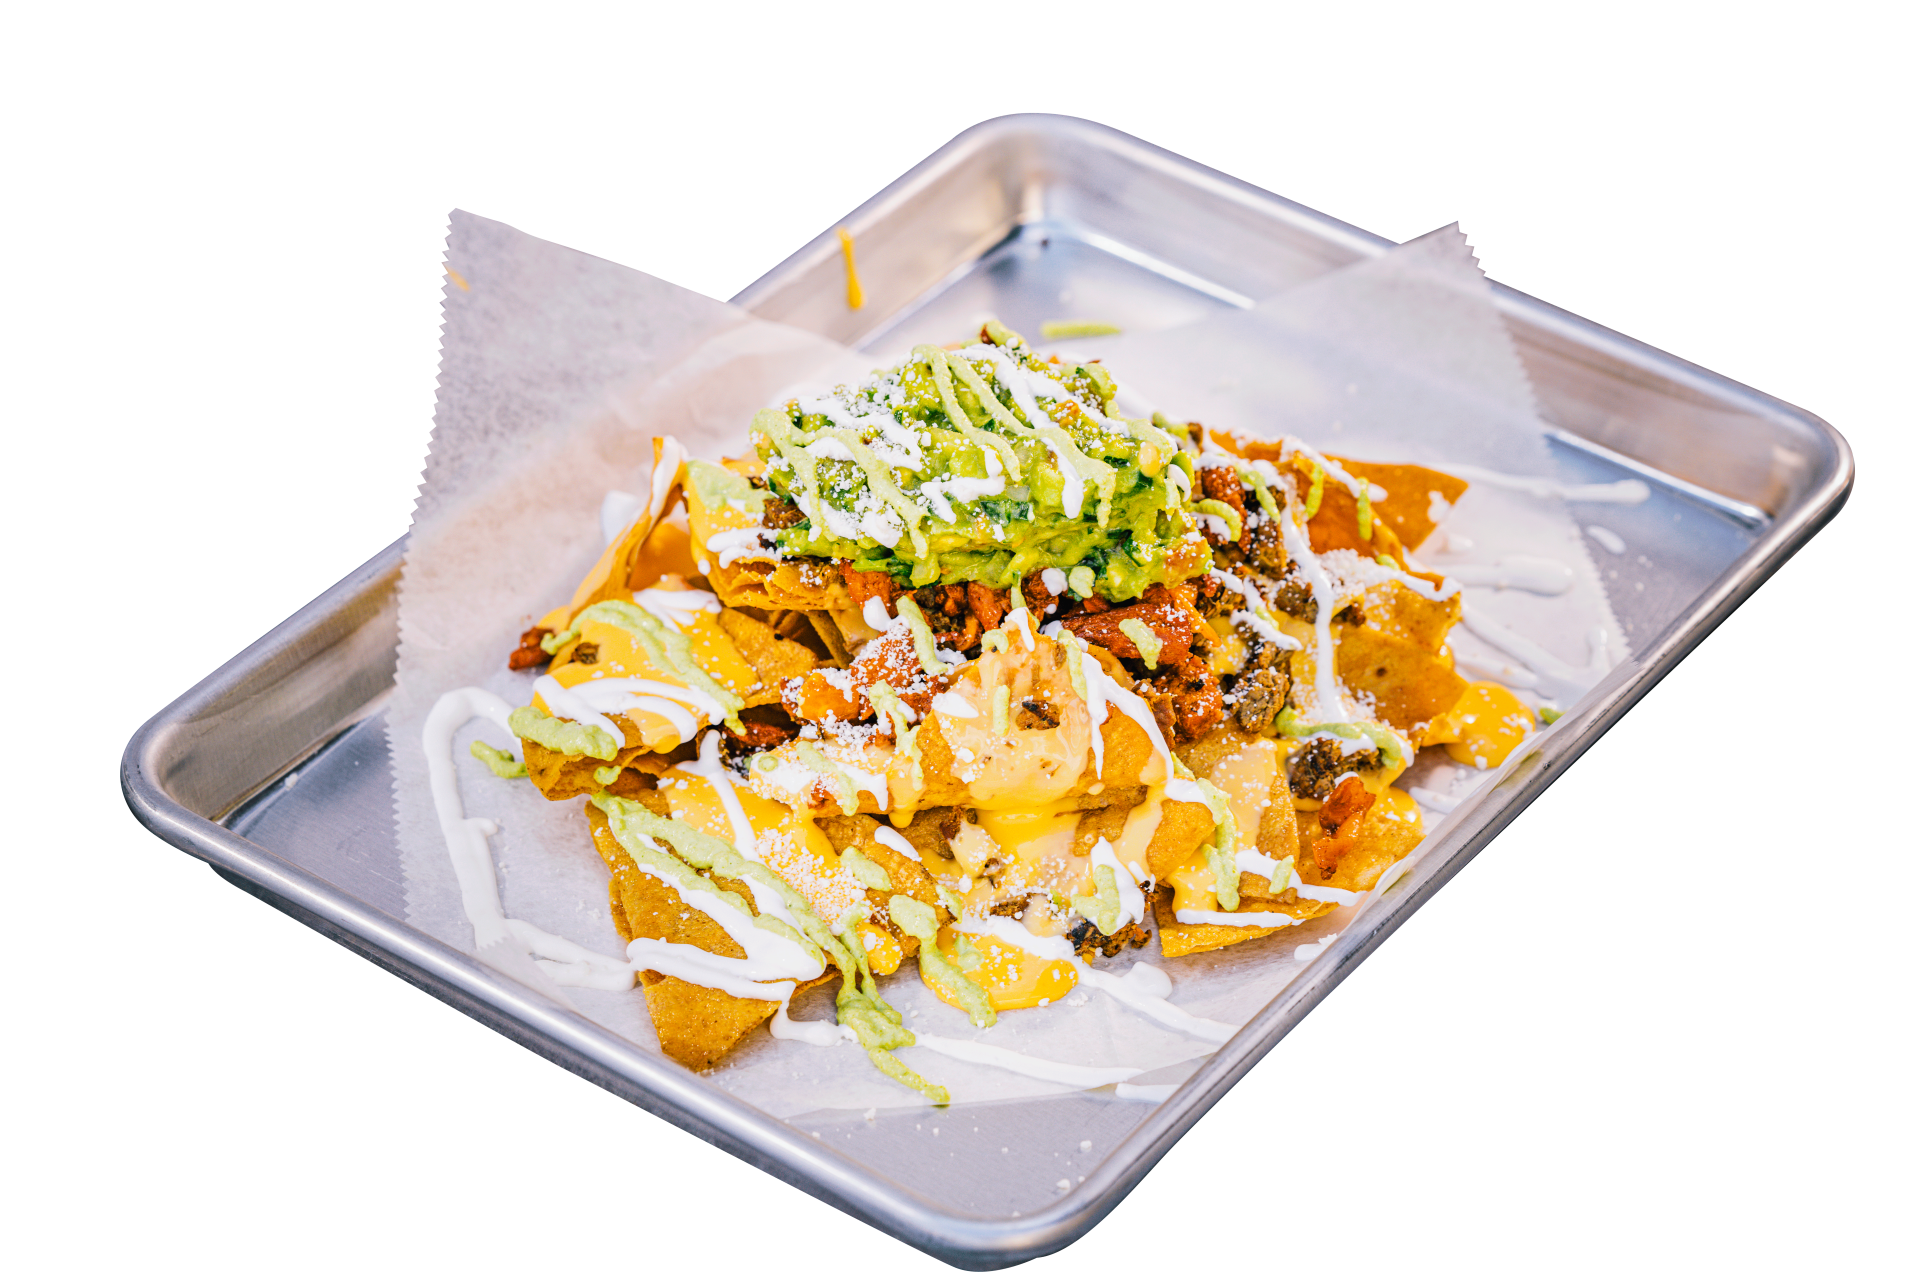 A tray of nachos with sauce and lettuce on a white background.